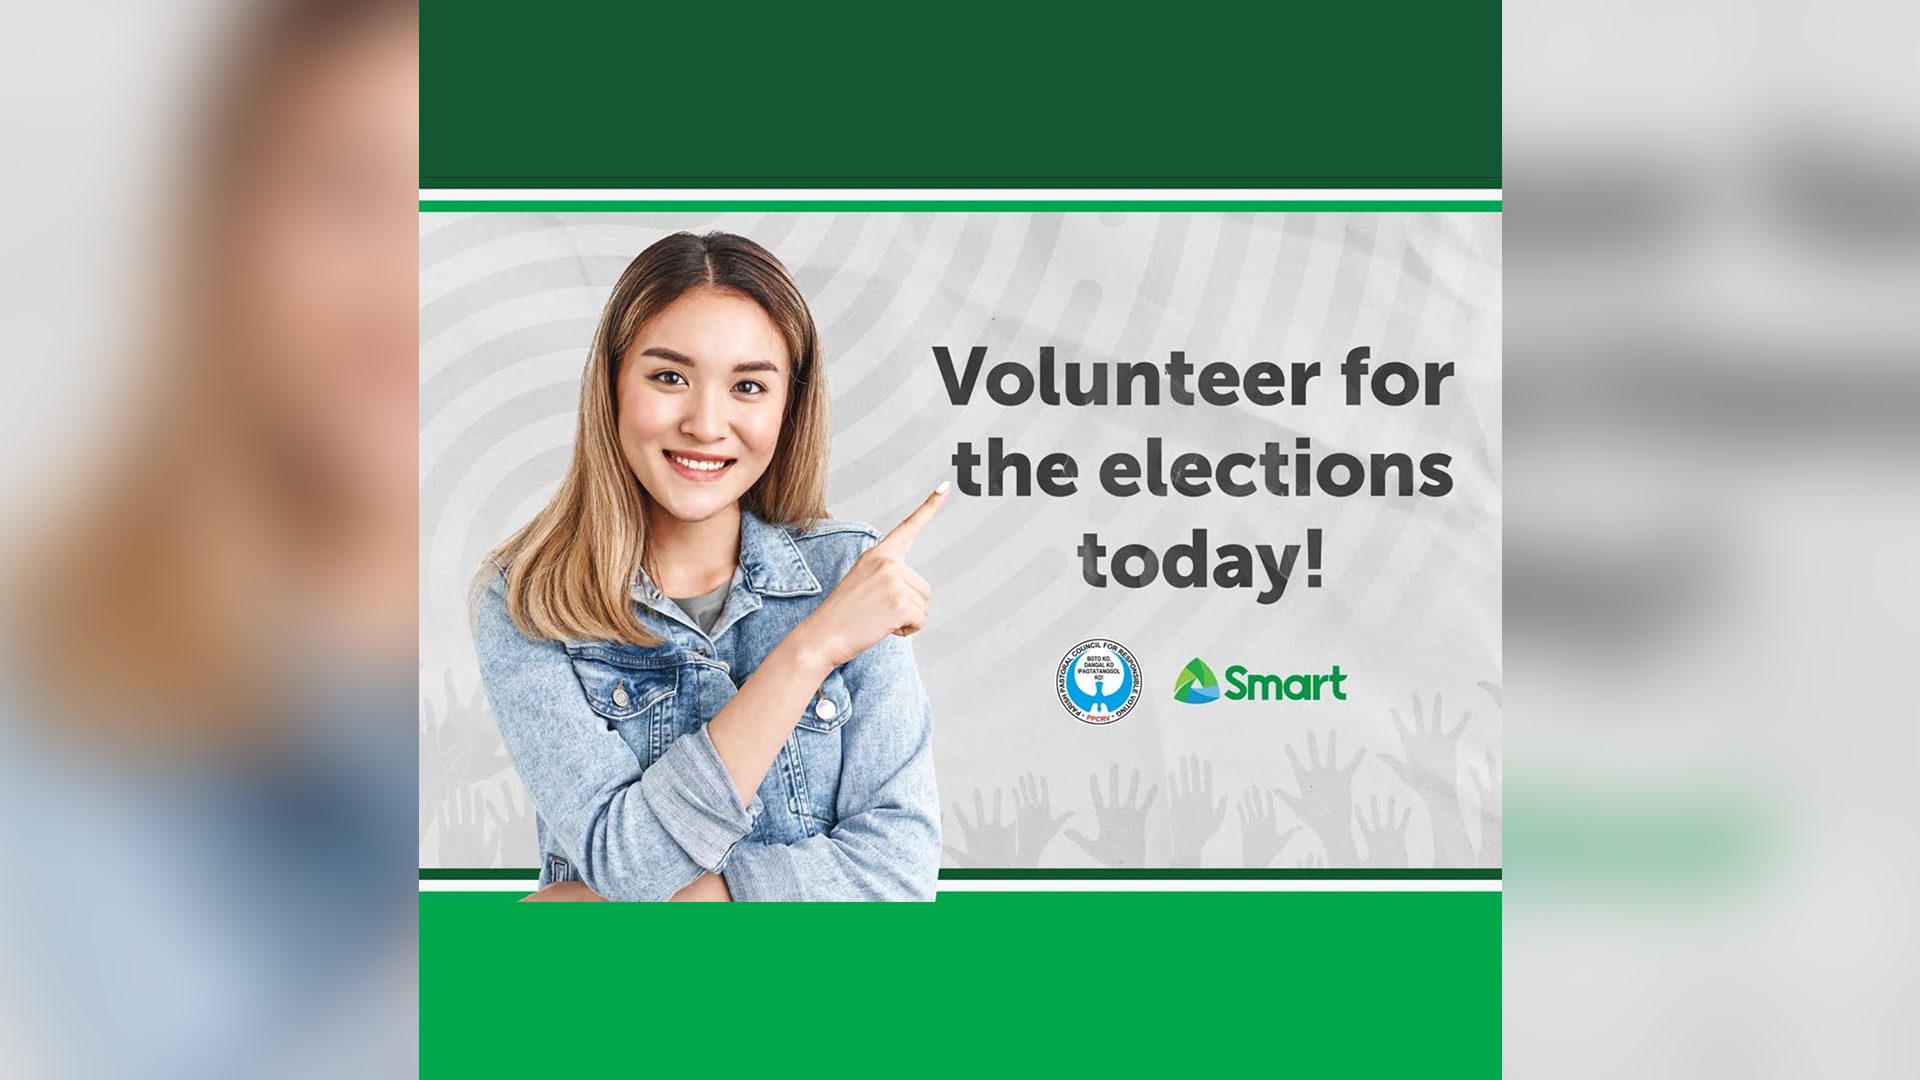 PPCRV partners with Smart in nationwide call for youth poll volunteers